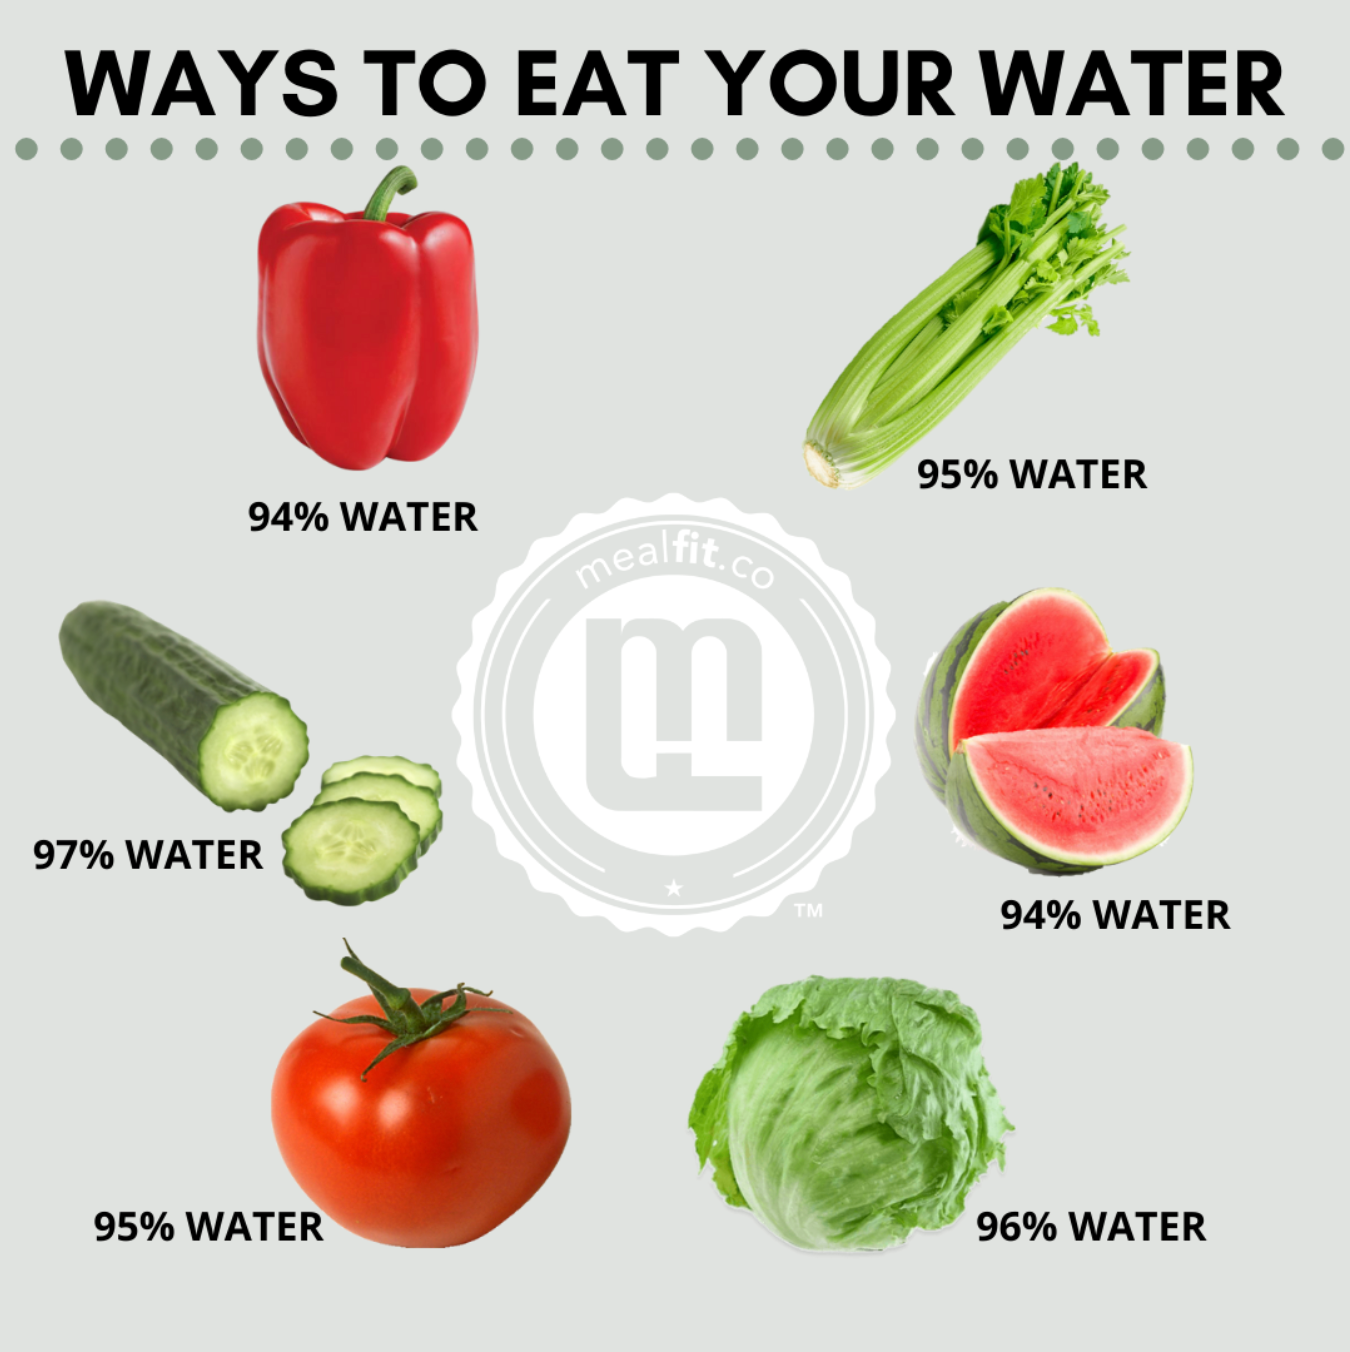 Ways to Eat Your Water